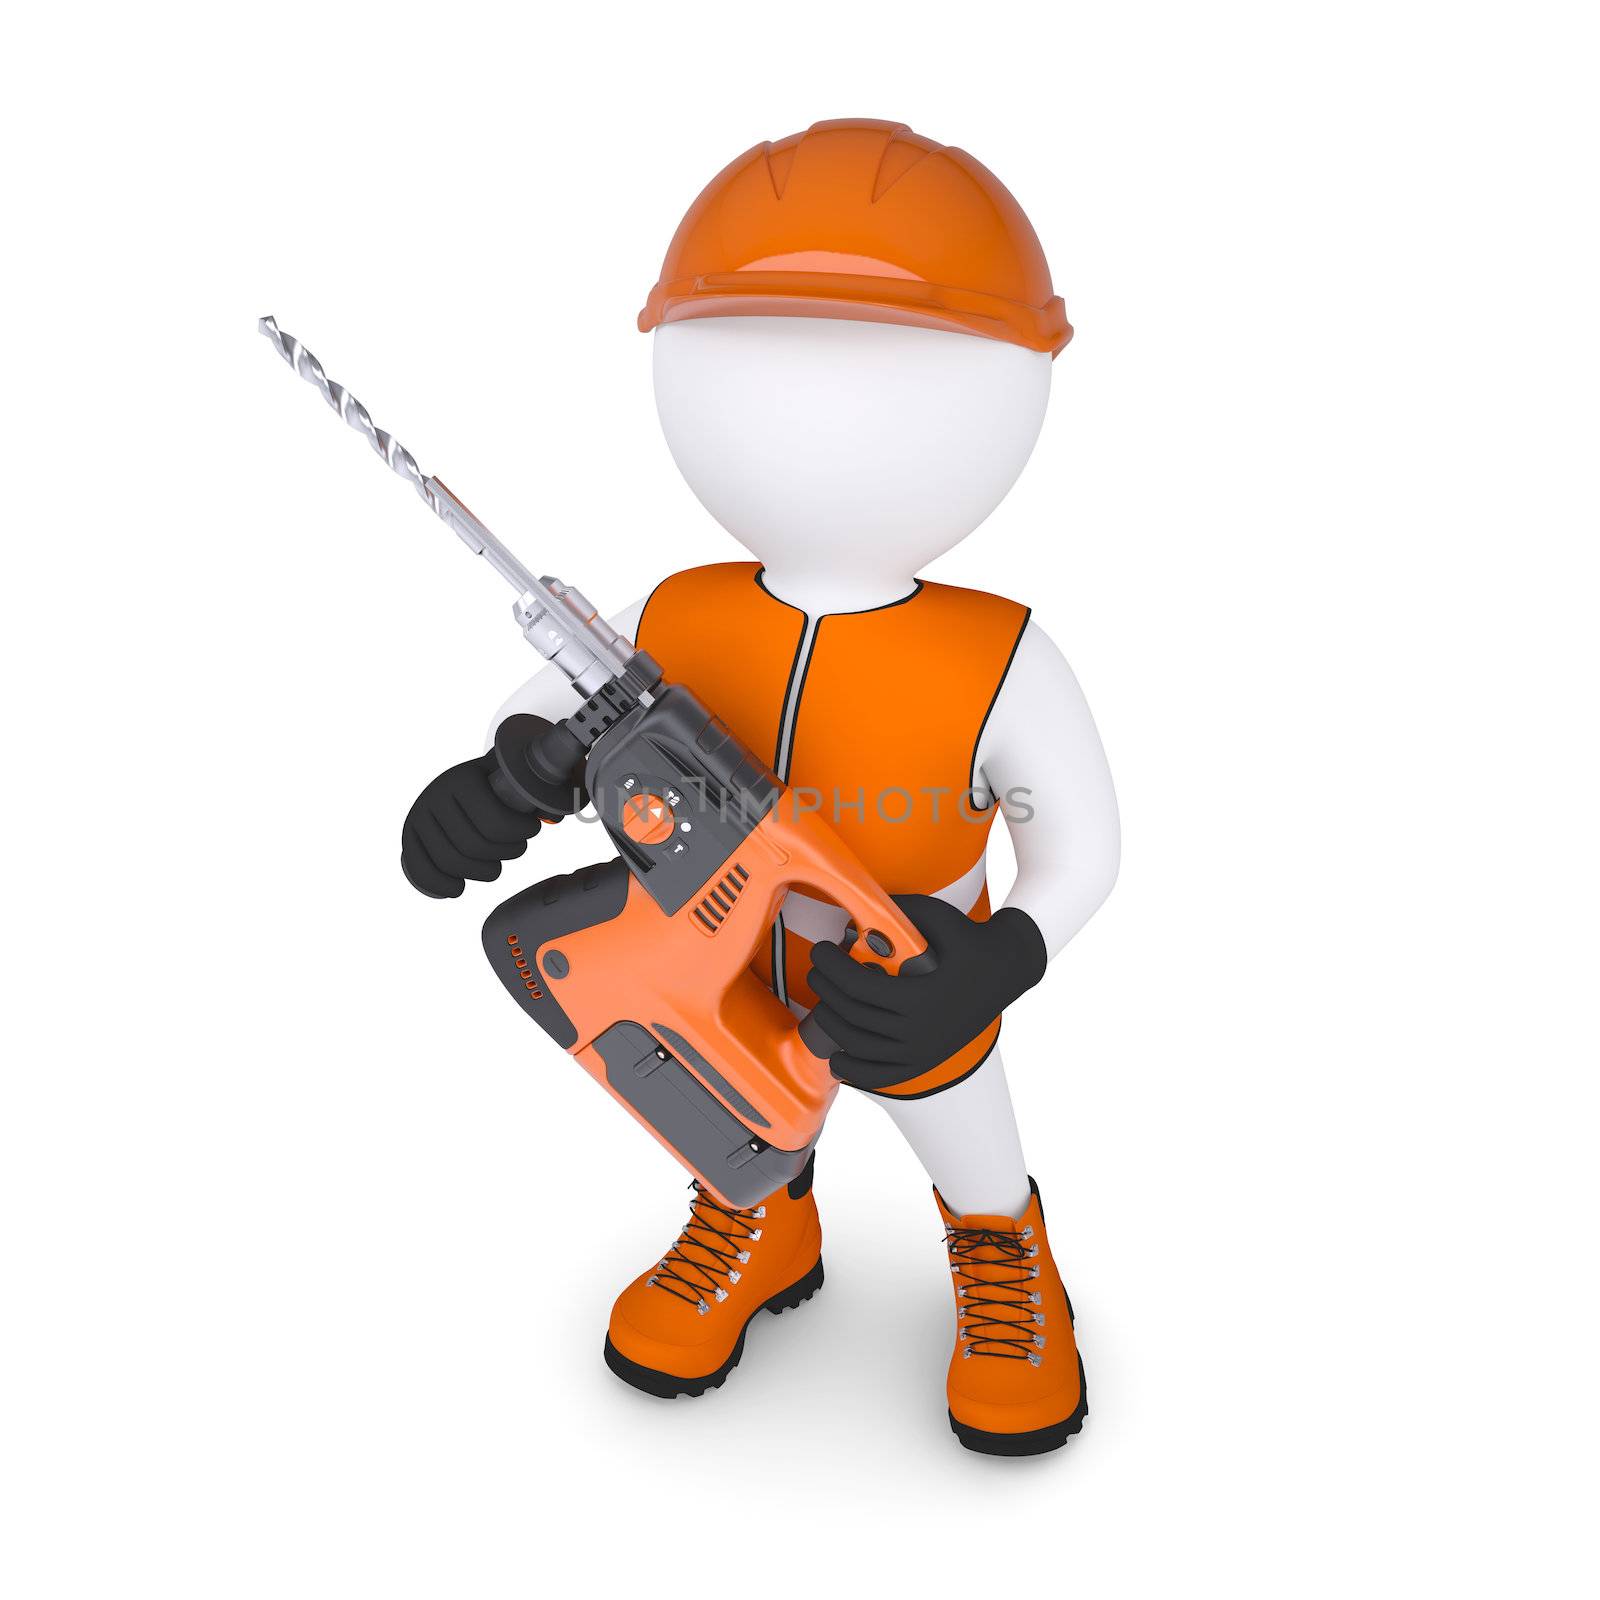 3d white man holding electric perforator. Isolated render on a white background